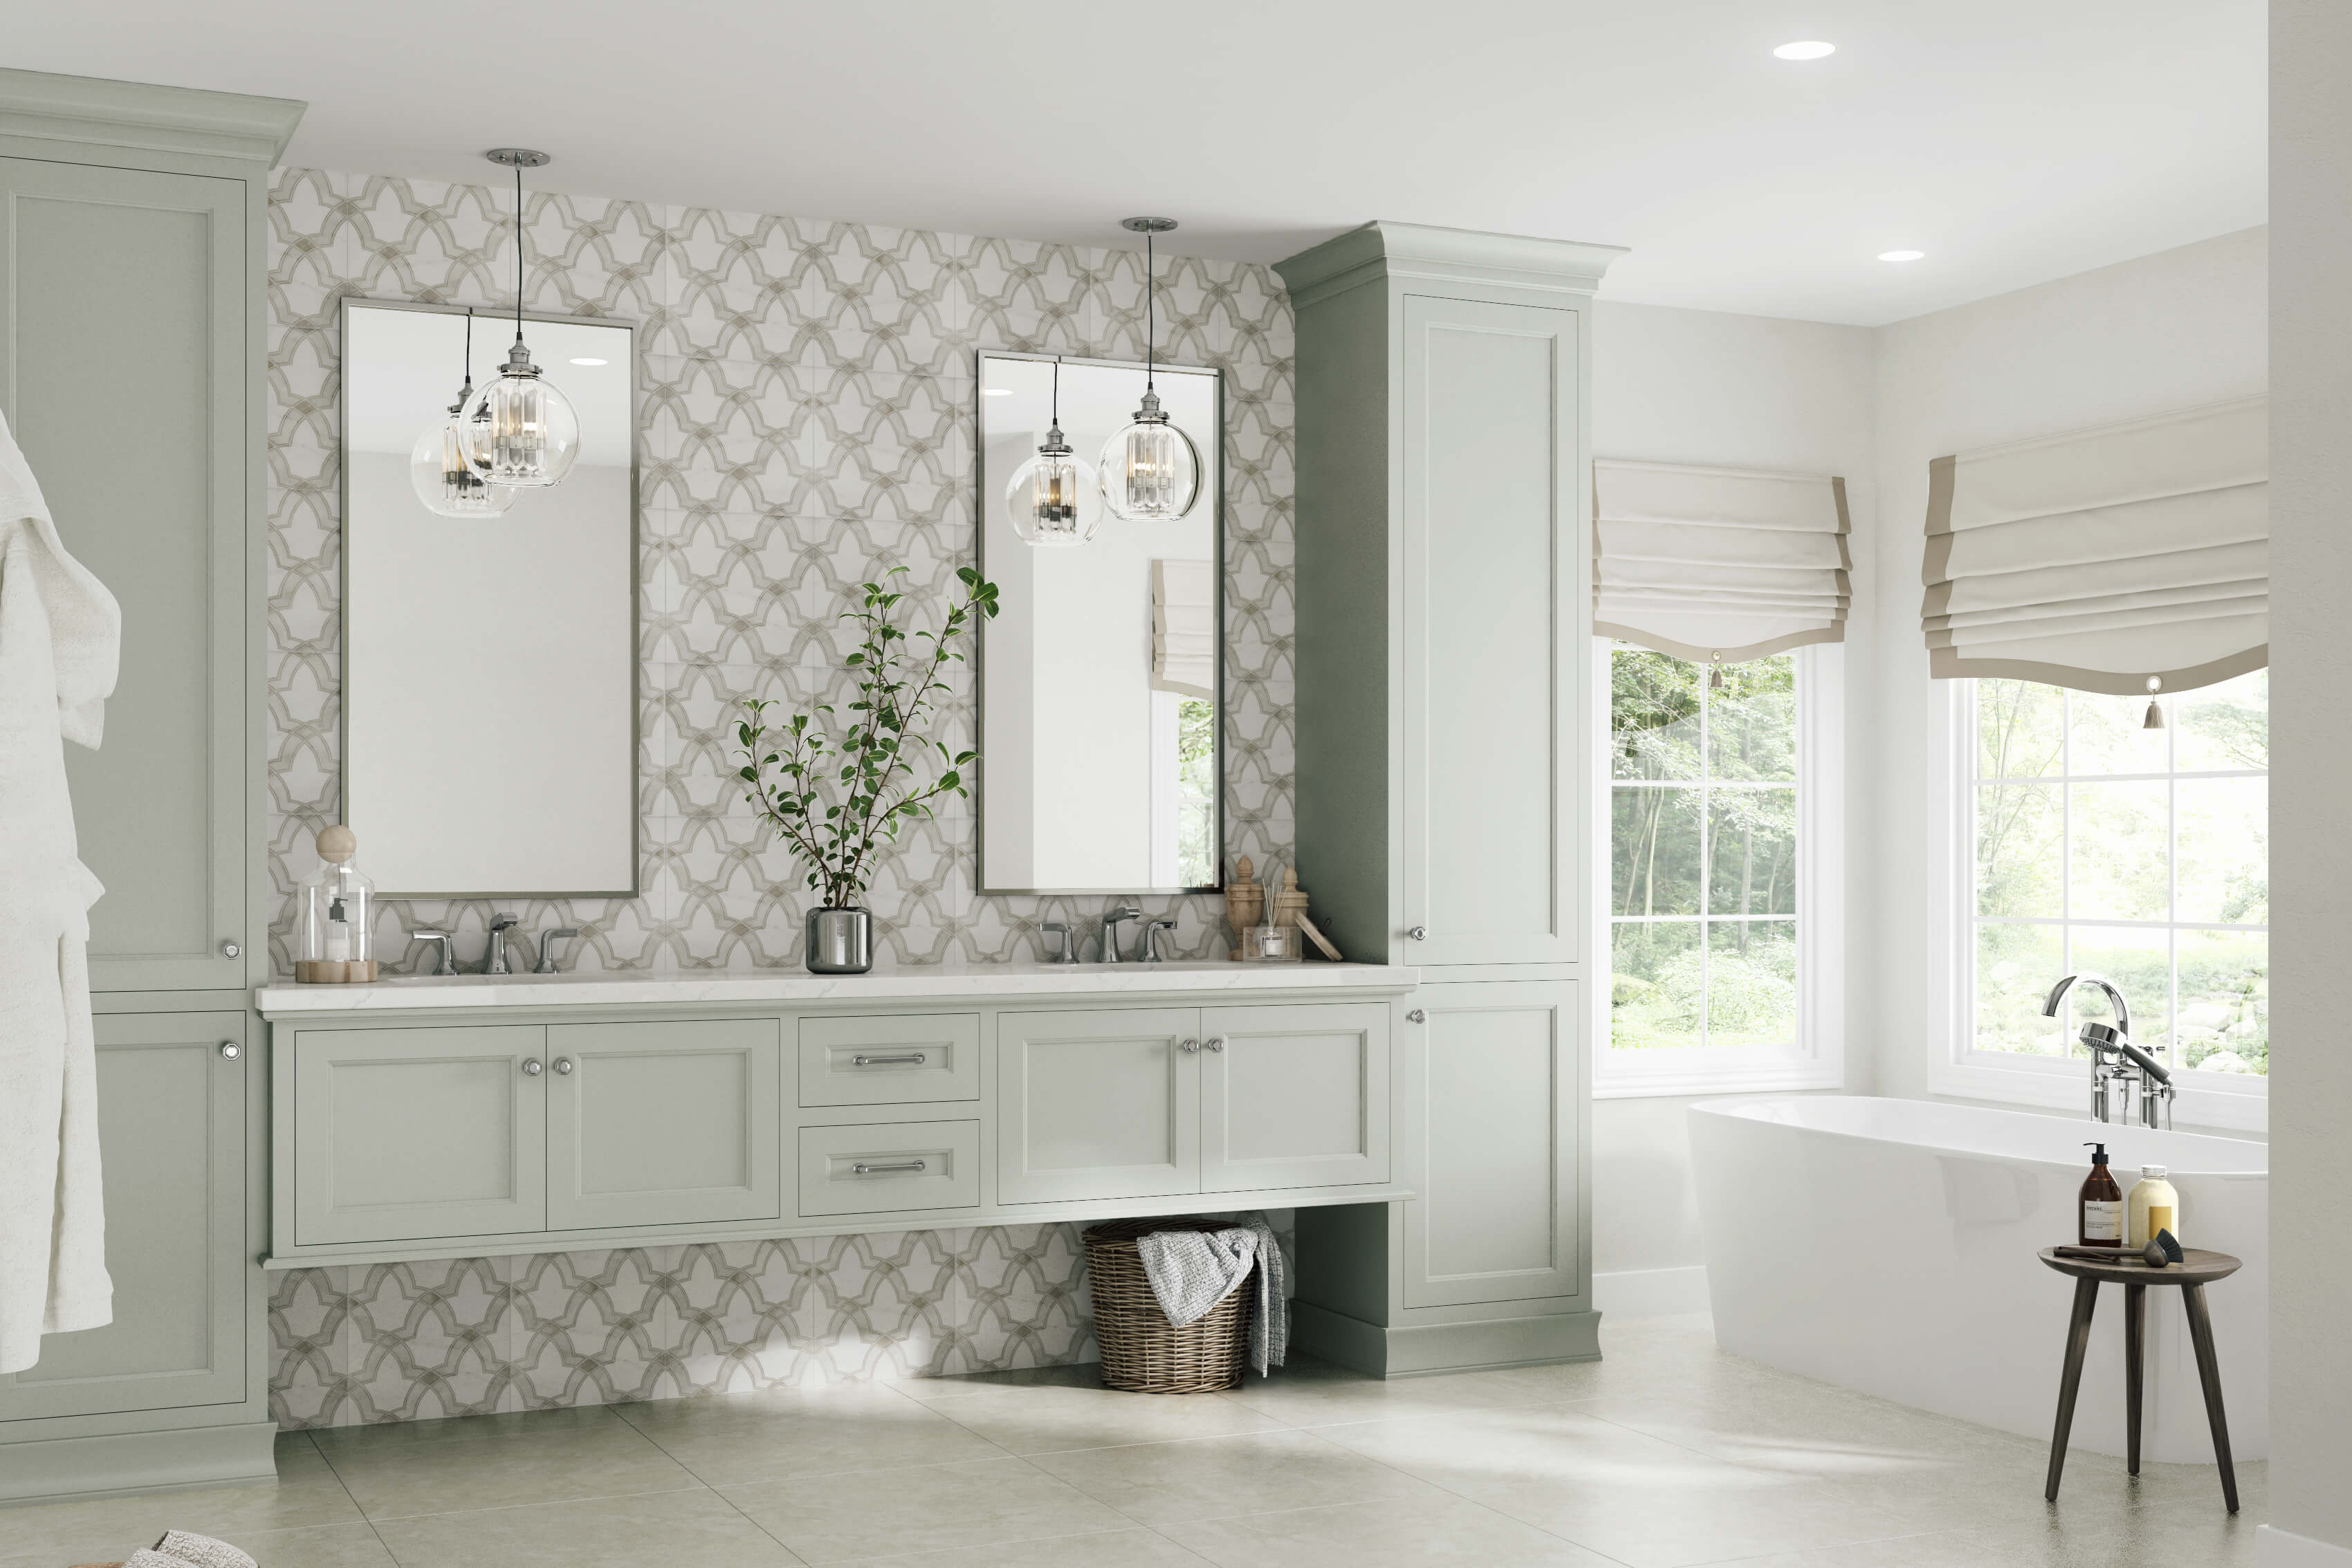 A modern and transitional style master bathroom with a floating vanity. The bathroom cabinets showcase a lovely light gray painted finish. The bathroom has large windows and a freestanding bath tub as well as a floor to ceiling backsplash that complements the color of the vanity cabinets.